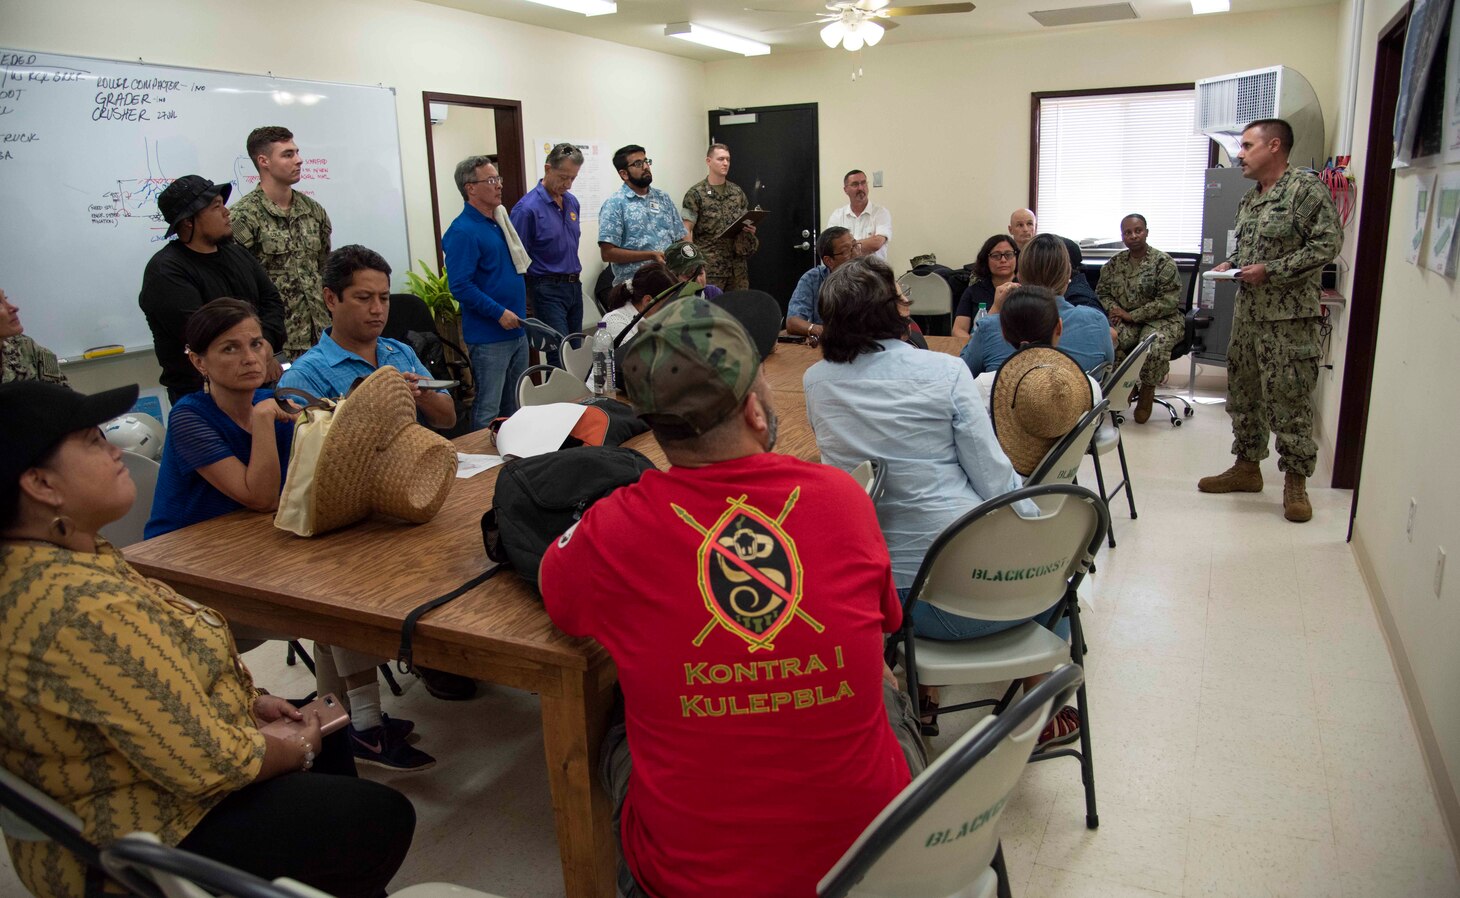 DEDEDO Guam (July 12, 2019) - Cmdr. Brian Foster, executive officer, Officer in Charge of Construction Marine Corps Marianas,  provides a safety brief to senators from the 35th Guam Legislature before a site visit at Northwest Field in Dededo July 12.  At the request of Sen. Tina Muna Barnes, speaker of the 35th Guam Legislature, Rear Adm. Shoshana Chatfield, commander, Joint Region Marianas and a team of Navy and Marine Corps environmental professionals led a senatorial visit to the site of the endangered Serianthes nelsonii tree at Northwest Field.  The group received a briefing from Marine Corps Activity Guam (MCAG) Environmental Director Al Borja and MCAG Natural Resources Specialist Lauren Gutierrez, and saw firsthand the military's commitment to environmental stewardship in the preservation of the island's ecosystem.